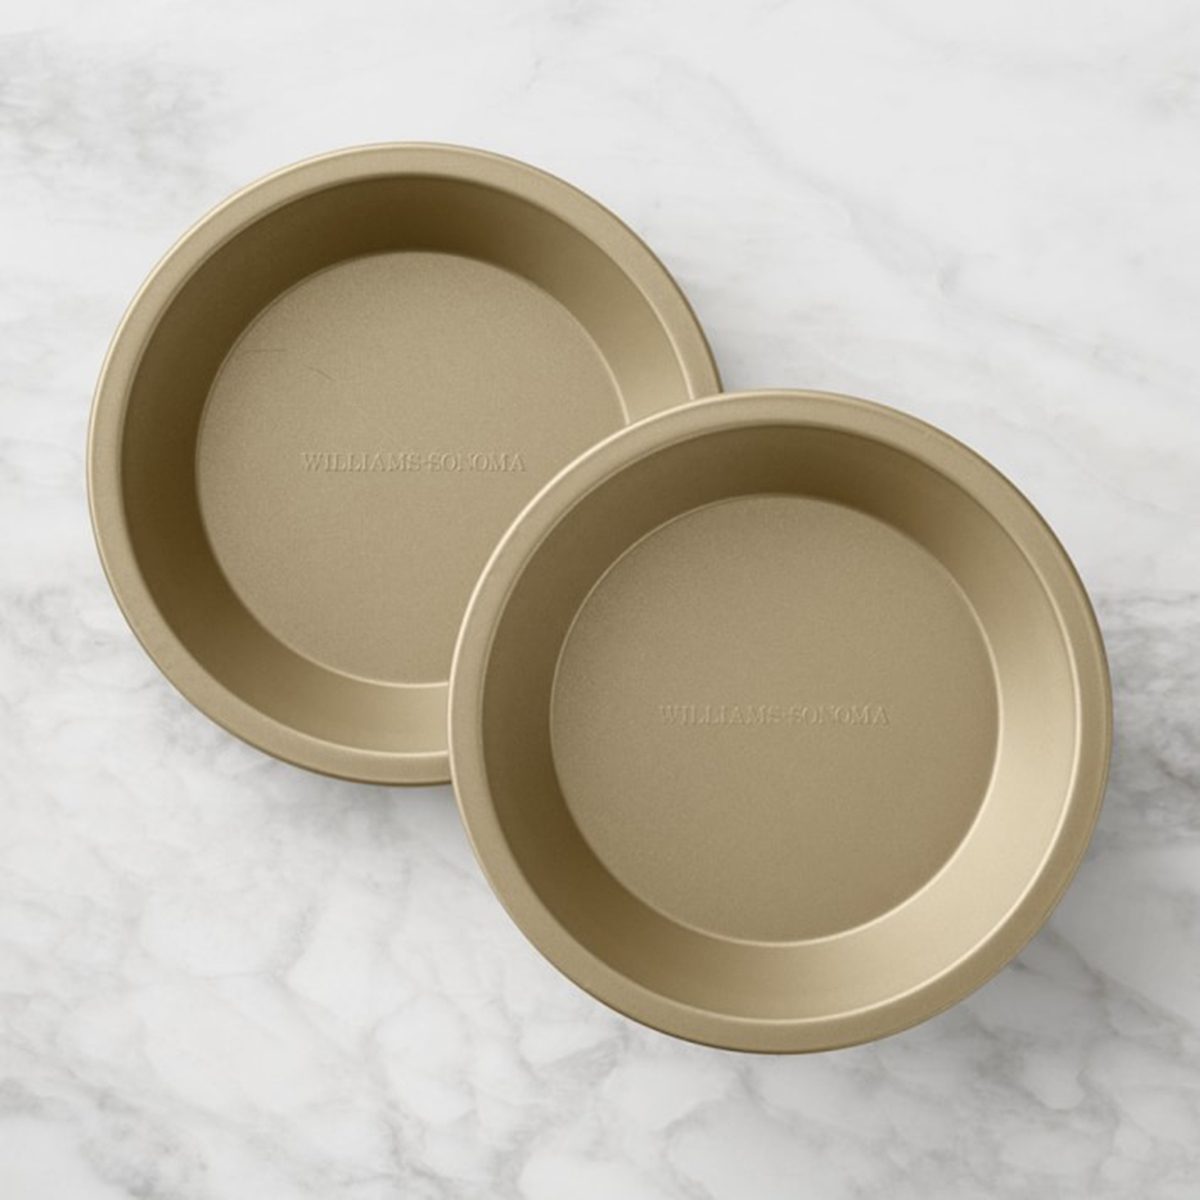 Williams Sonoma Goldtouch Pie Pans